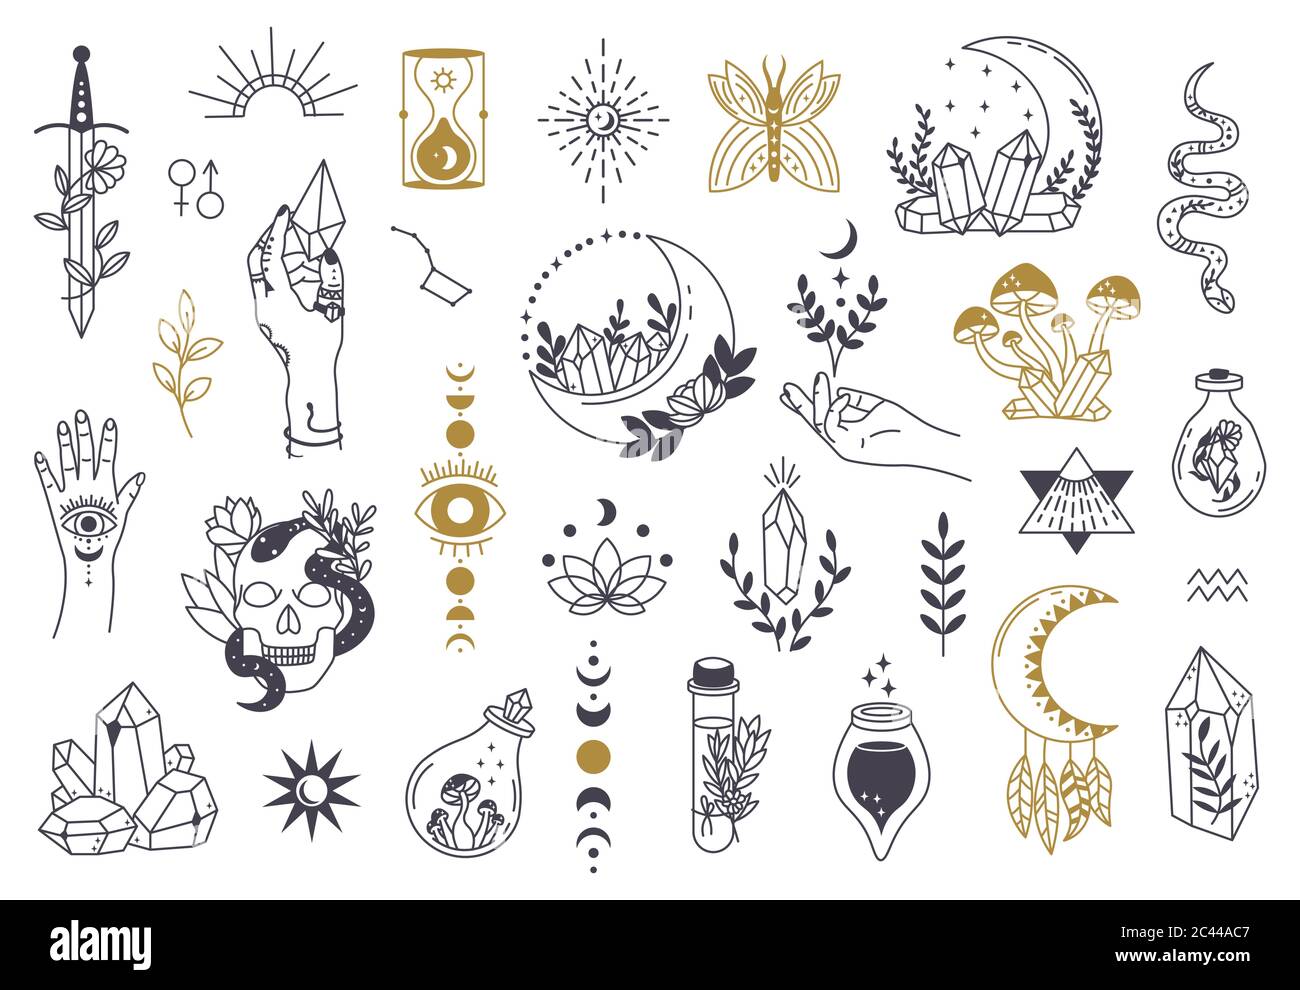 Witch magic symbols. Doodle esoteric, boho mystical hand drawn elements, magic witchcraft crystal, eyes, moon vector illustration icons set Stock Vector